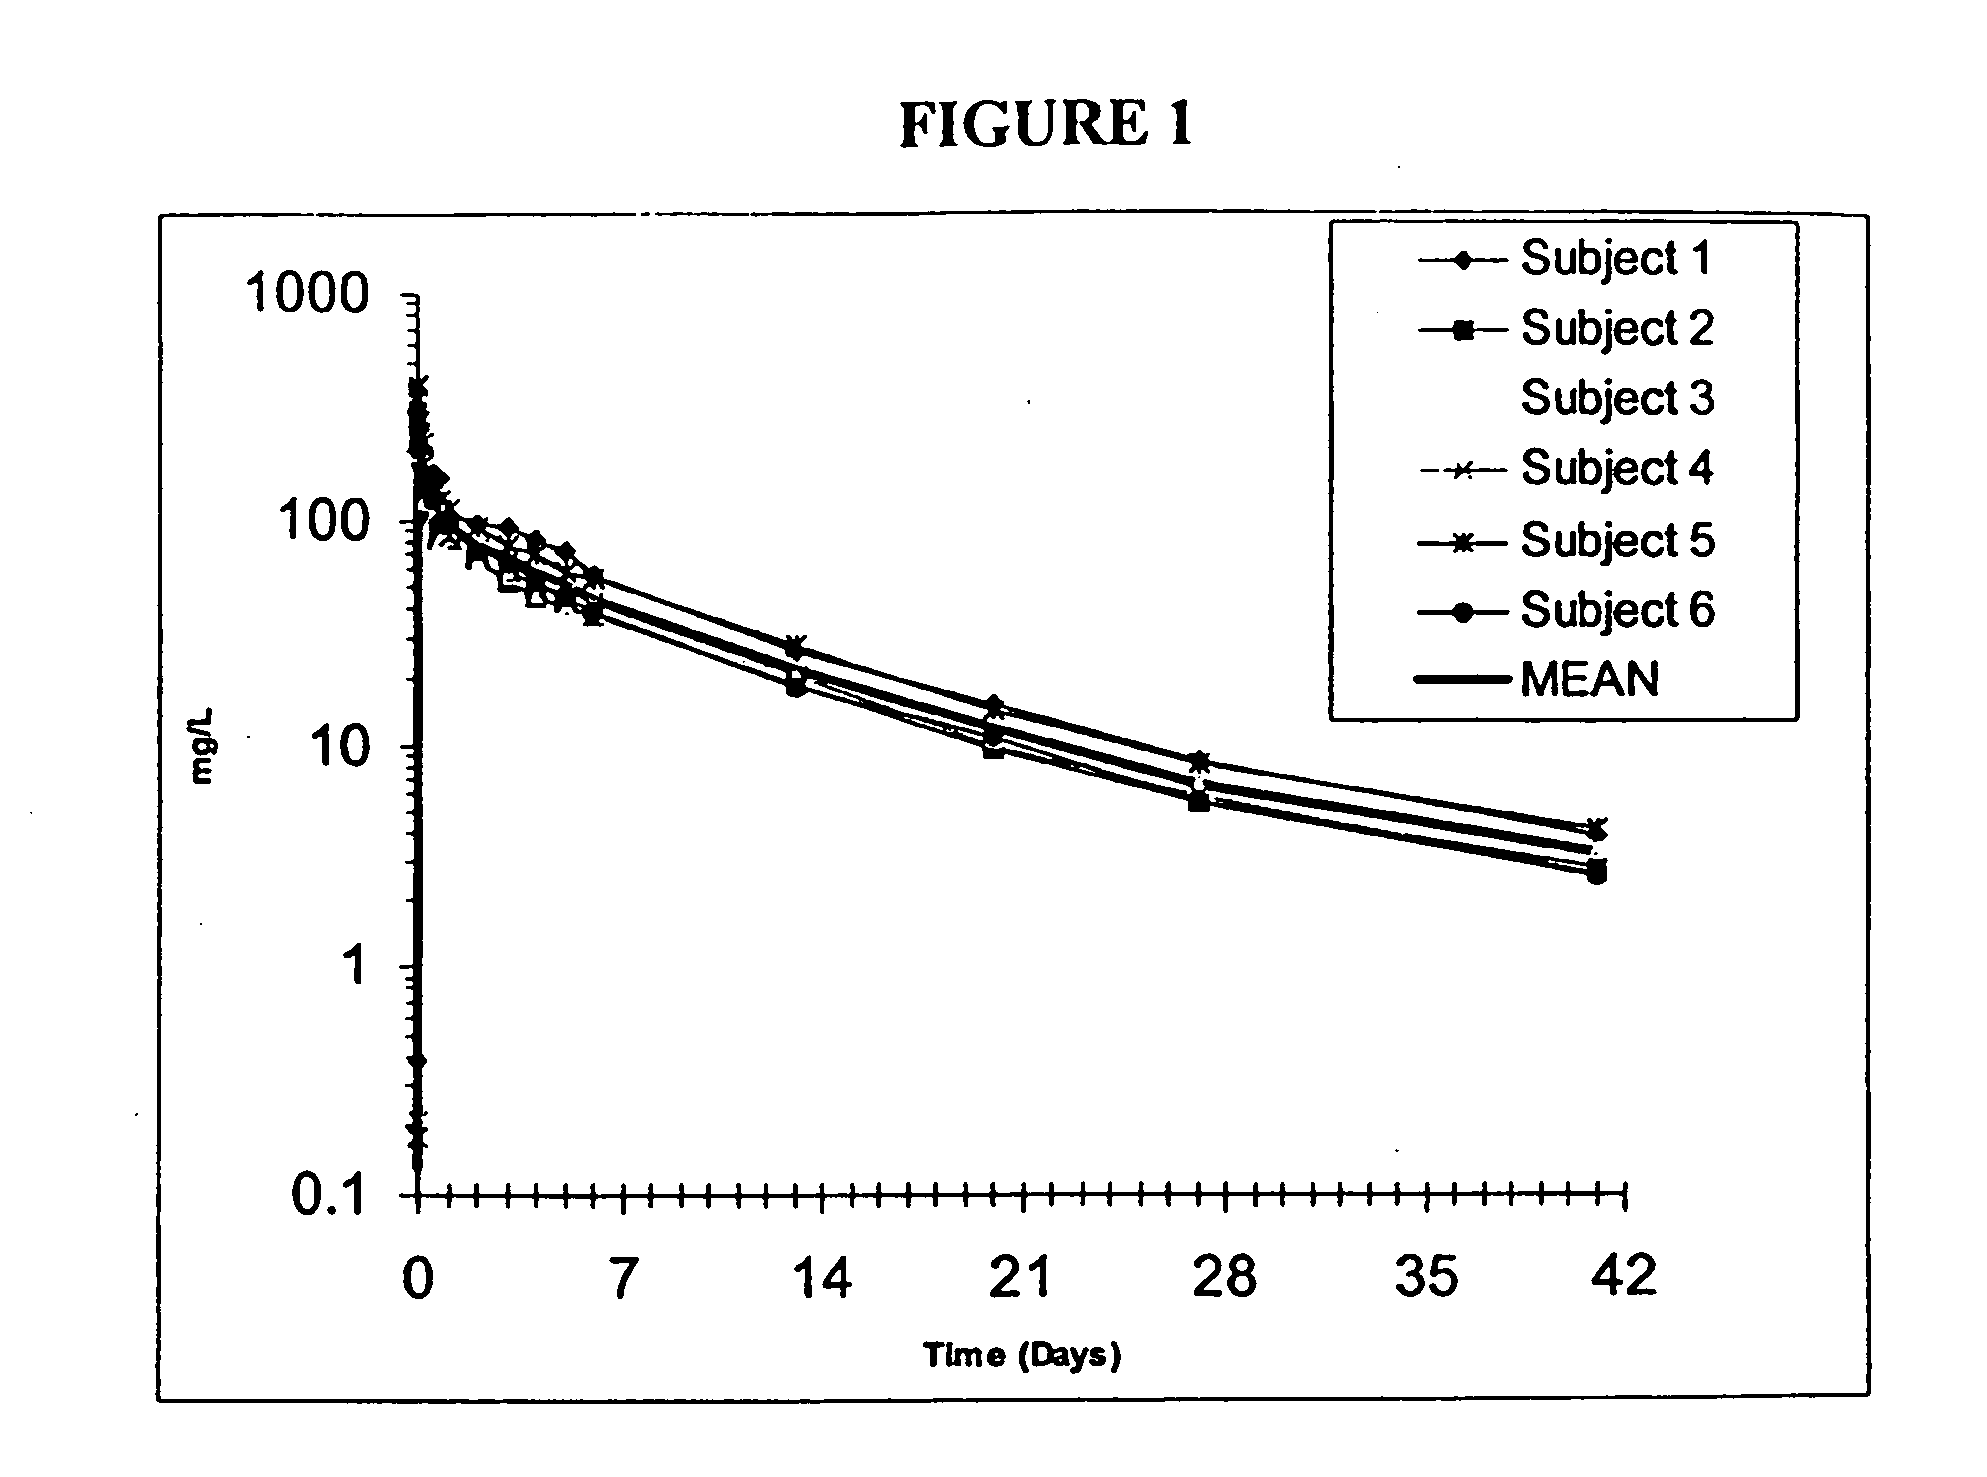 Methods of administering dalbavancin for treatment of skin and soft tissue infections